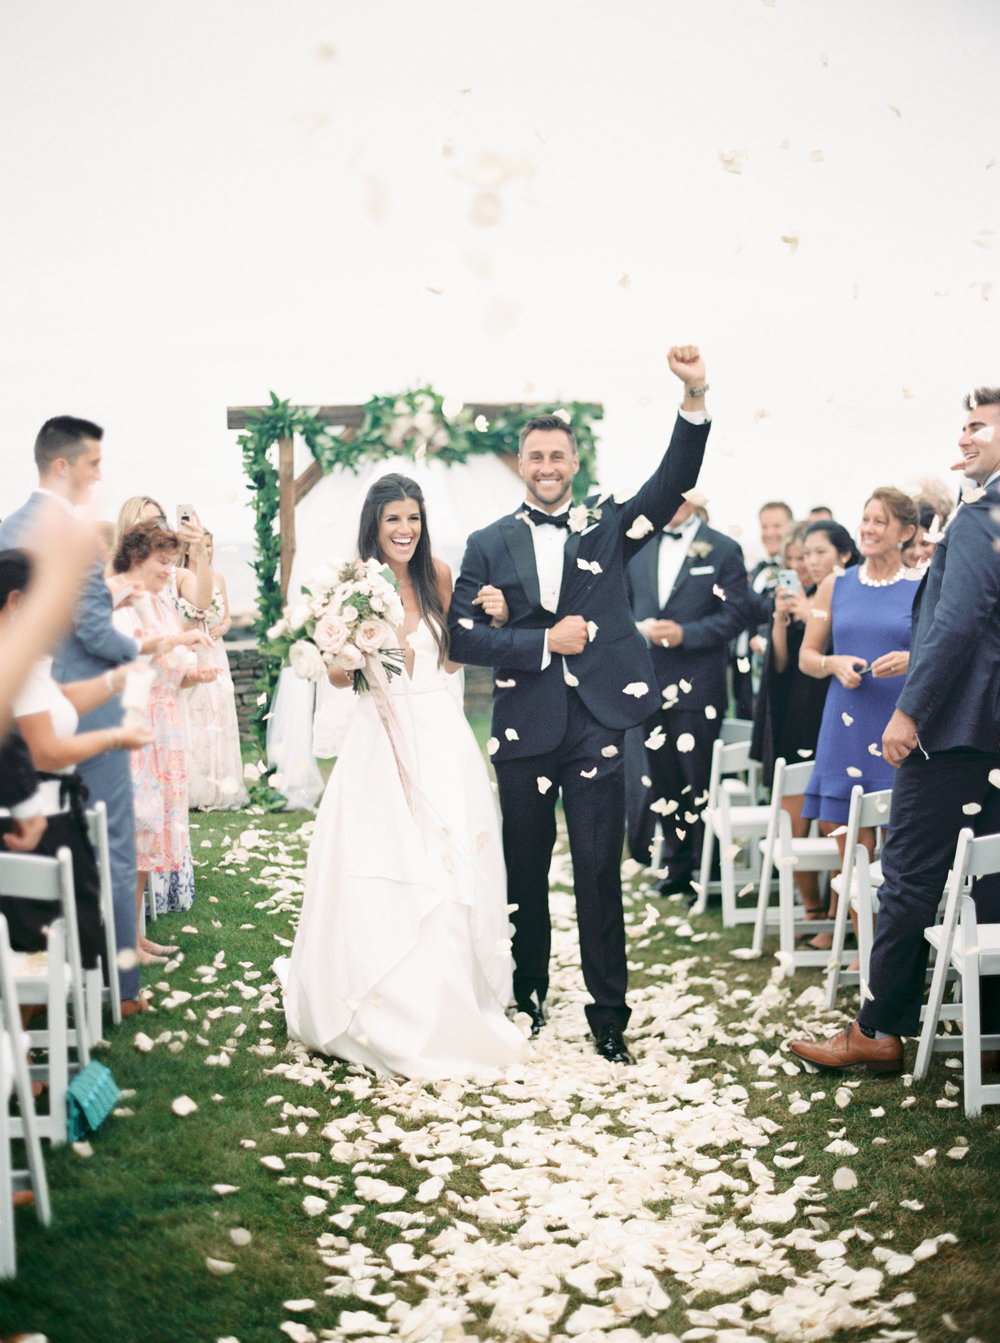 How Much Does a Wedding Actually Cost?